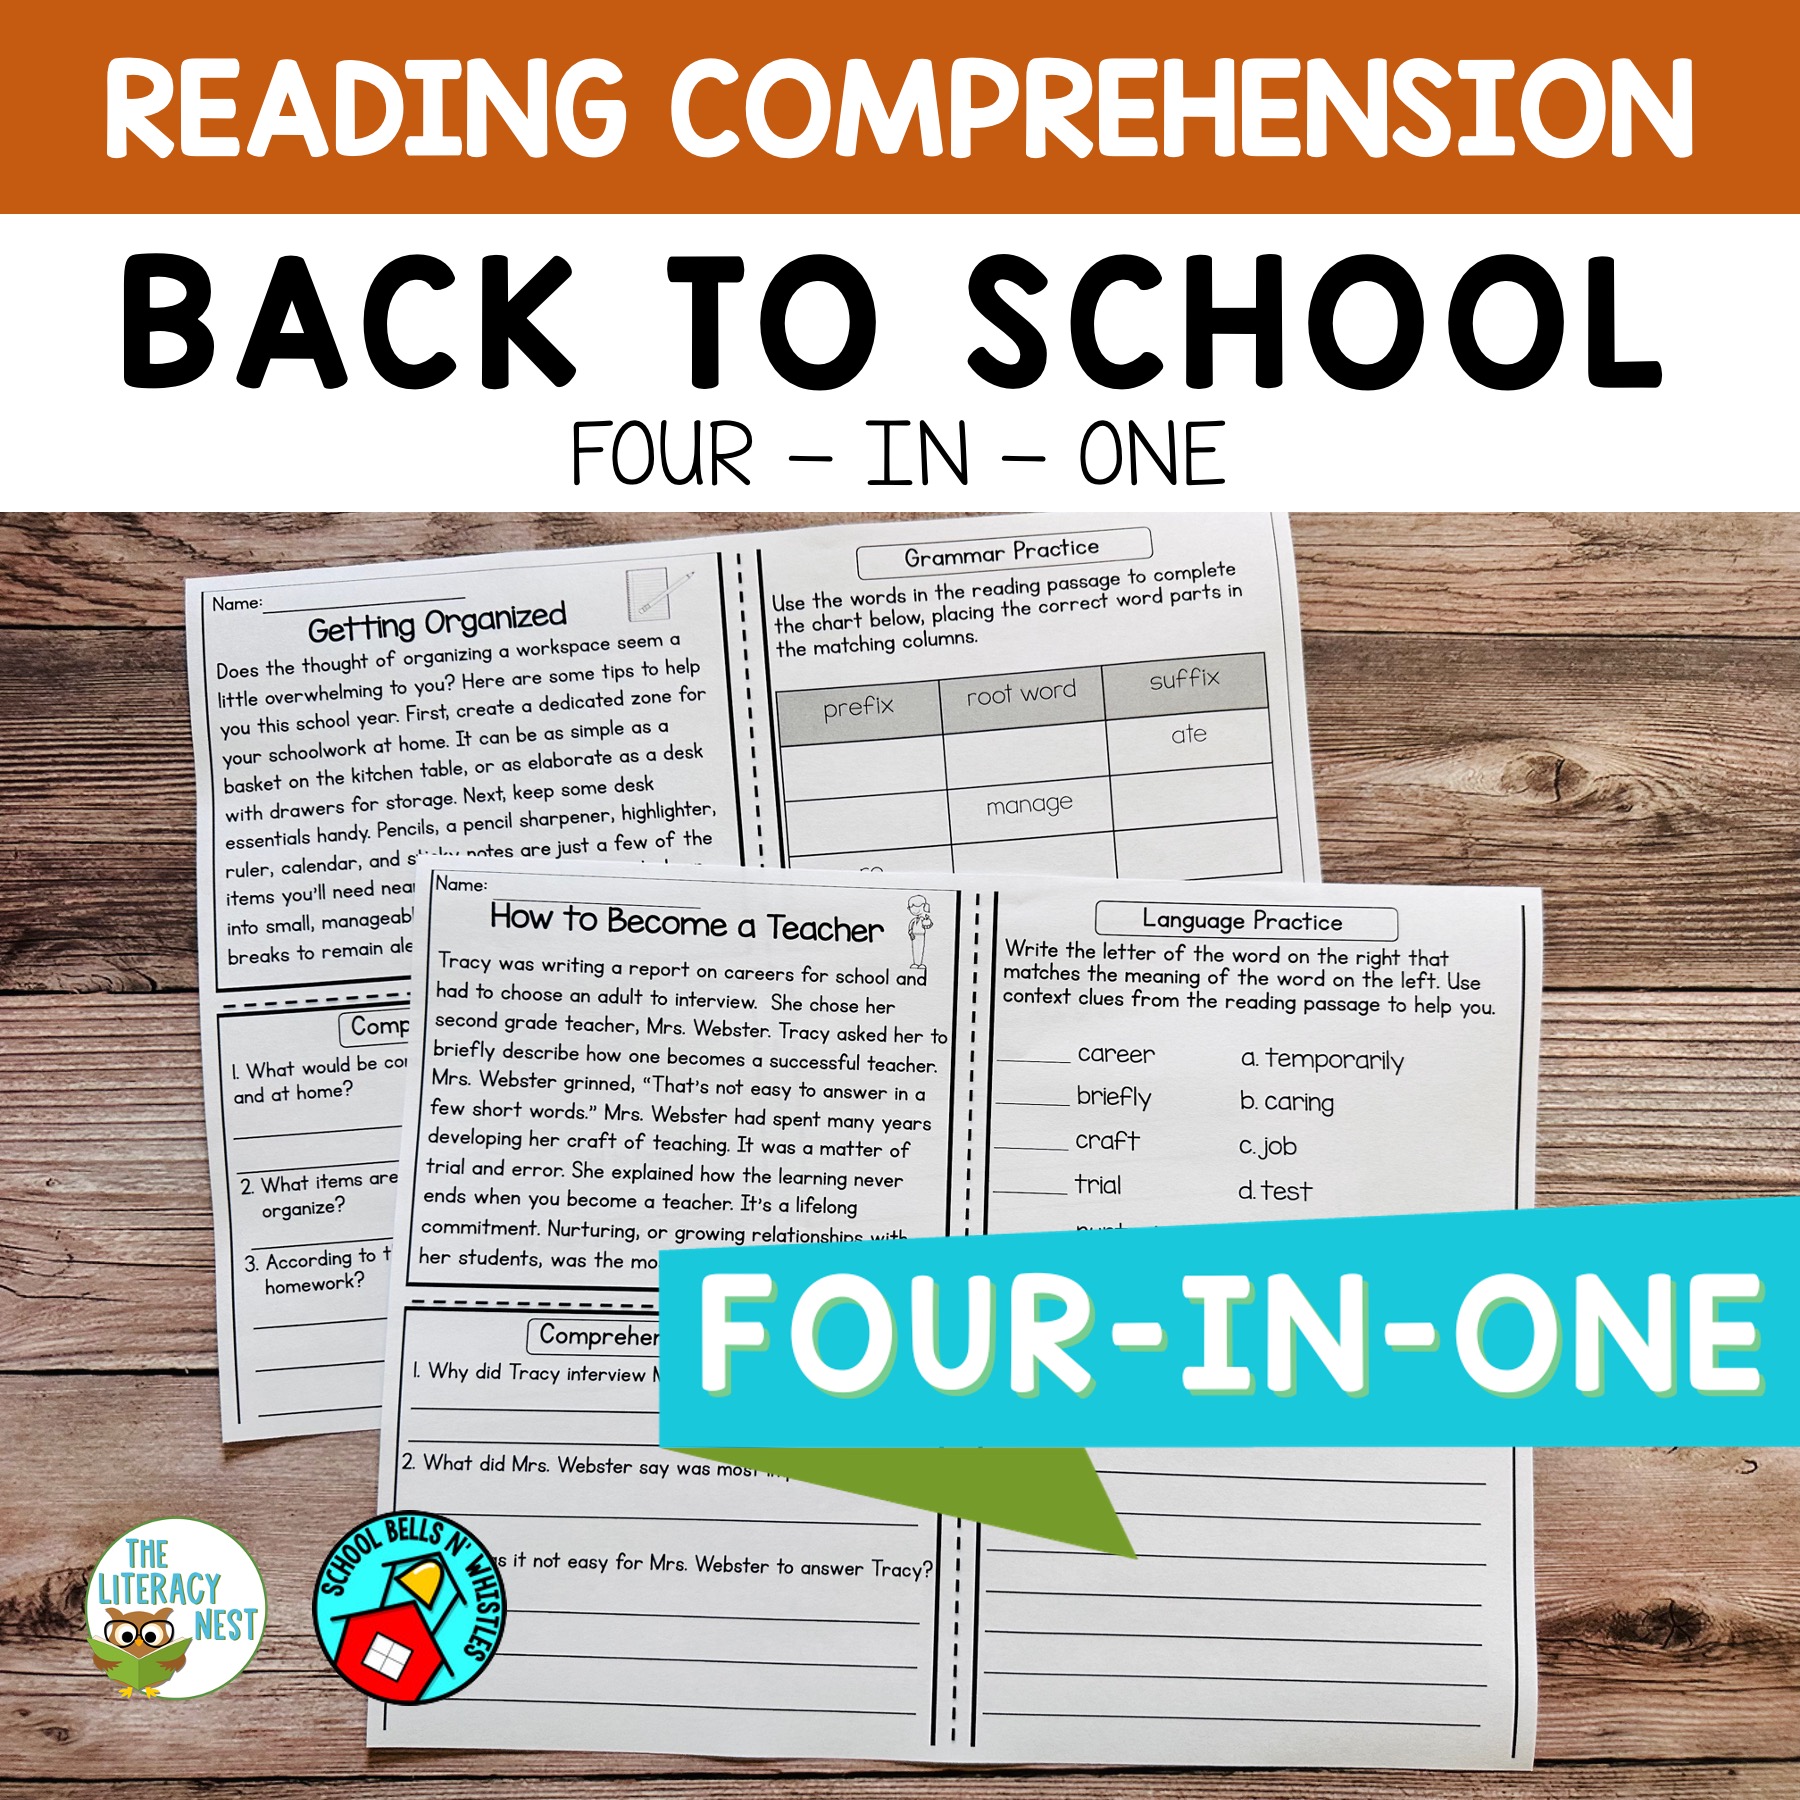 Reading Comprehension Back To School